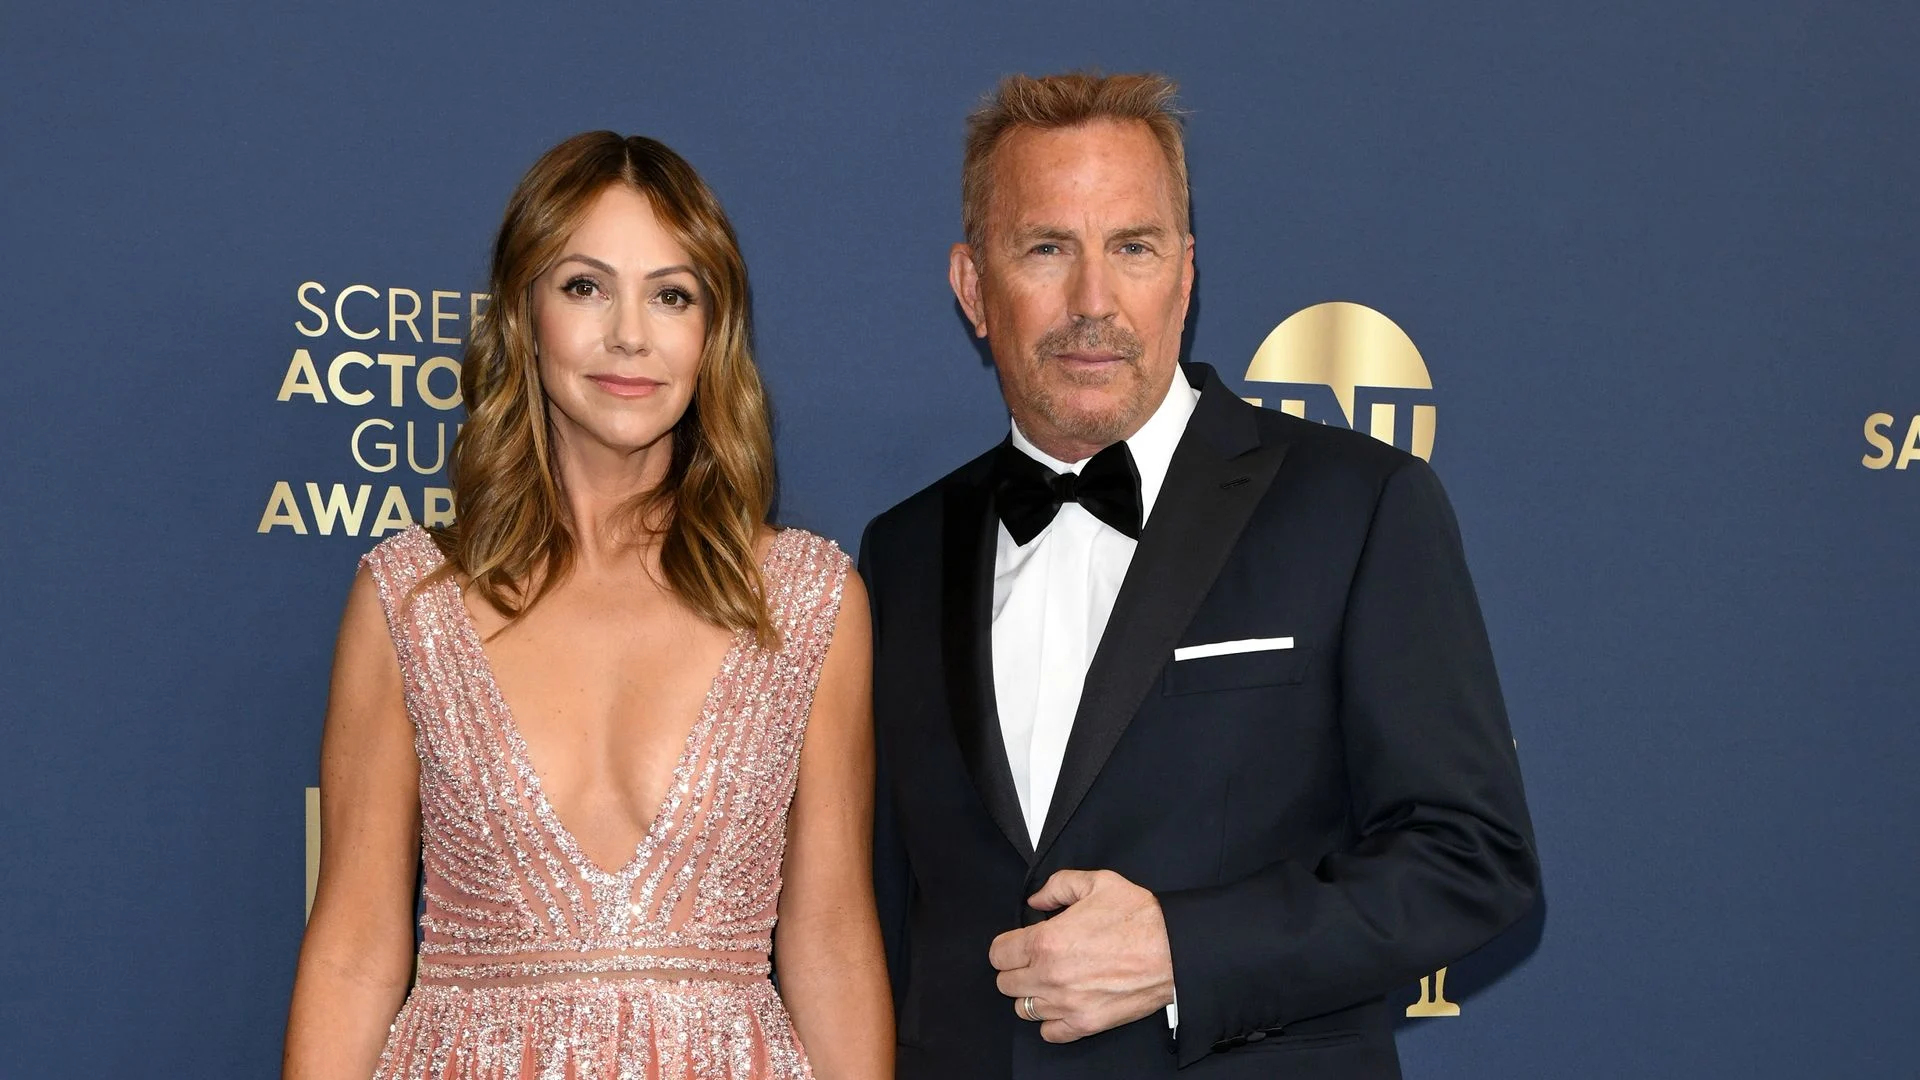 Kevin Costner Speaks Out: The True Reasons Behind His Unexpected Divorce and Career Shifts